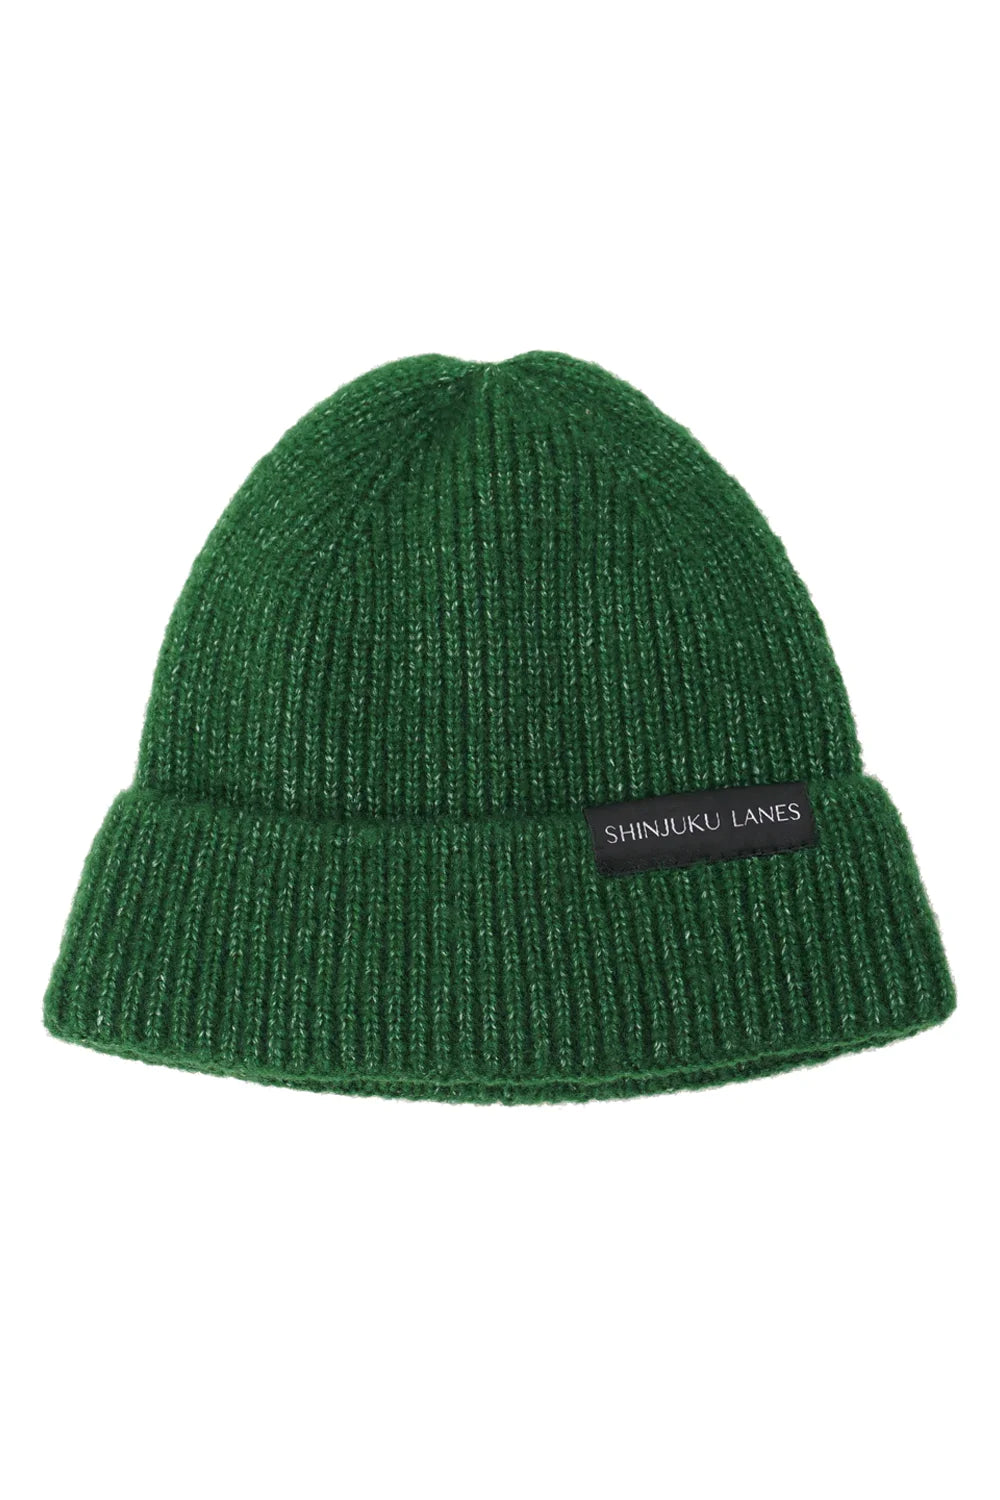 Product picture of Origin Ribbed Beanie - Flecked Green